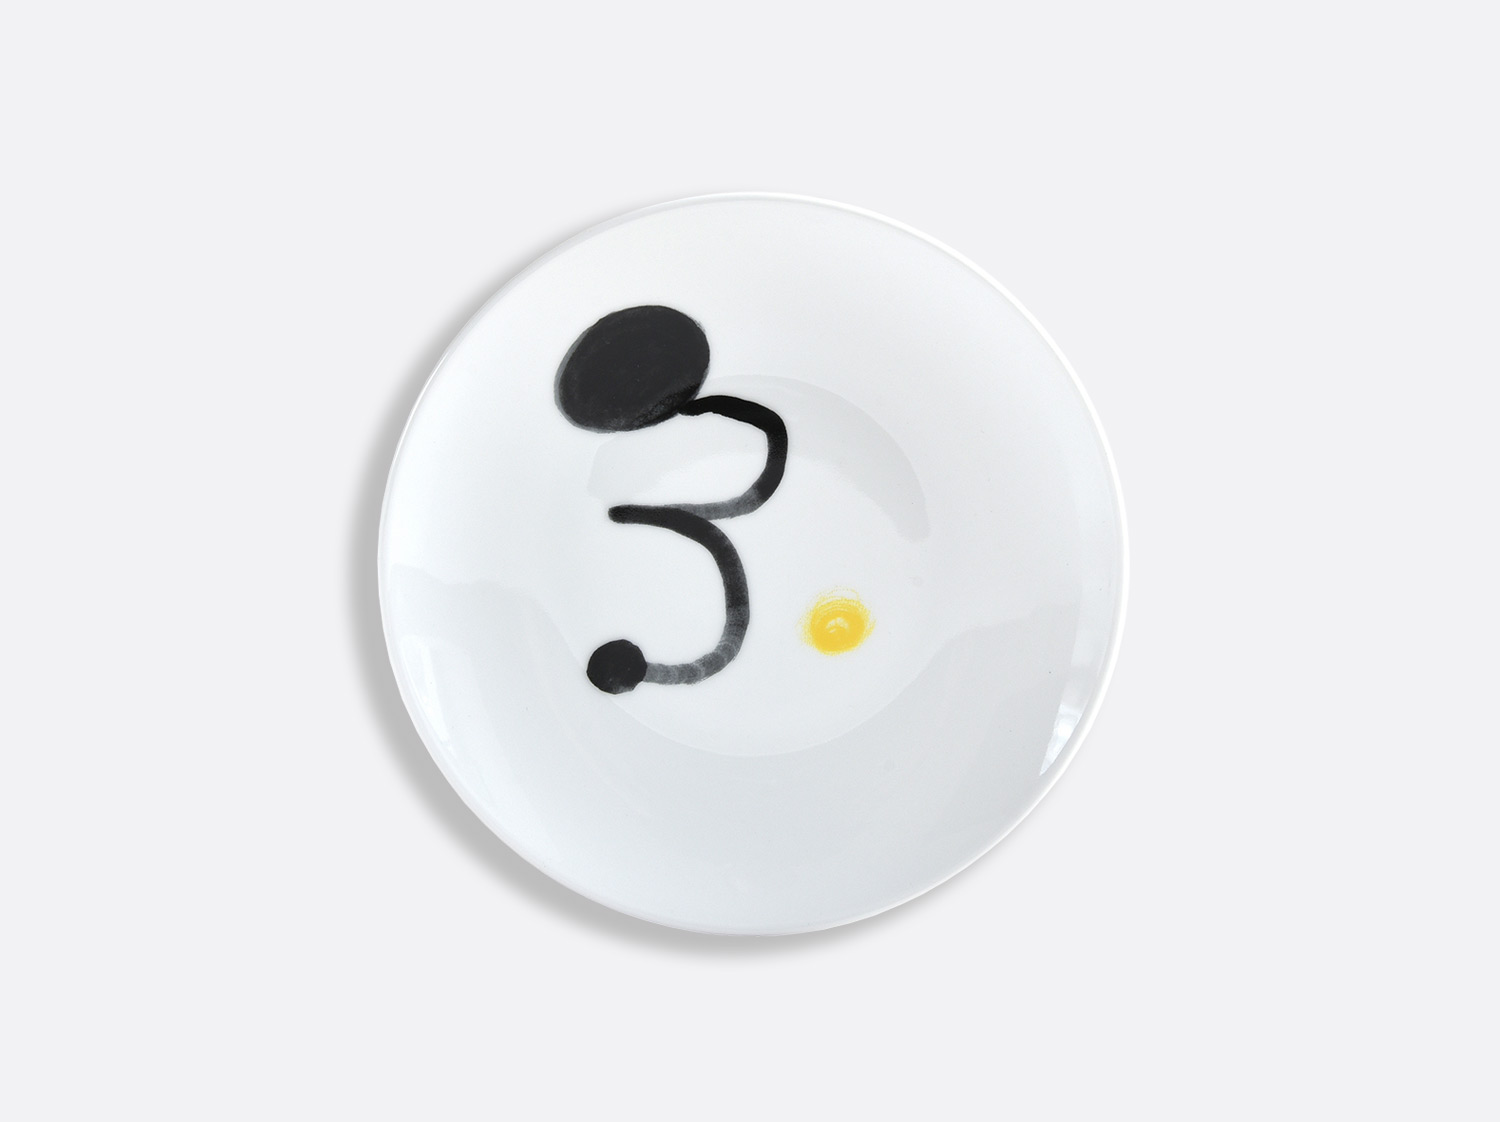 China 2 Bread and butter plates 6.5" Jaune - Page 52 of the collection PARLER SEUL - Joan Miro | Bernardaud